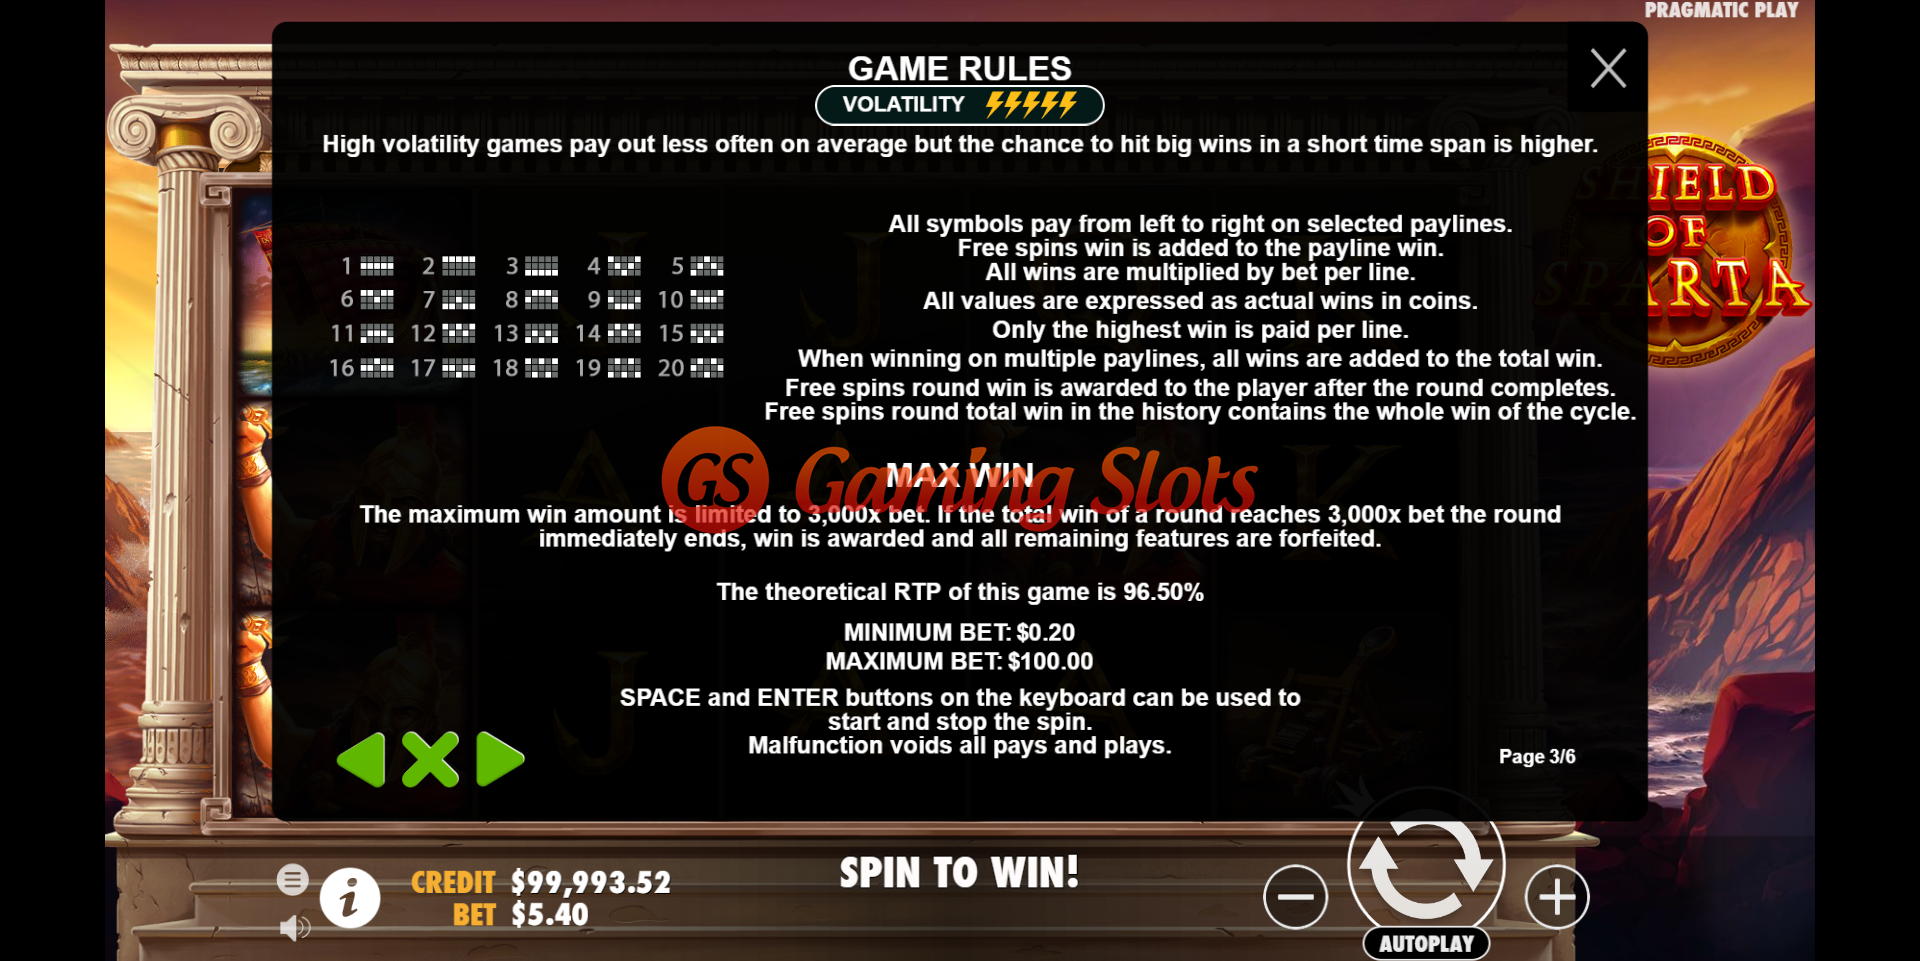 Game Rules for Shield of Sparta slot from Pragmatic Play